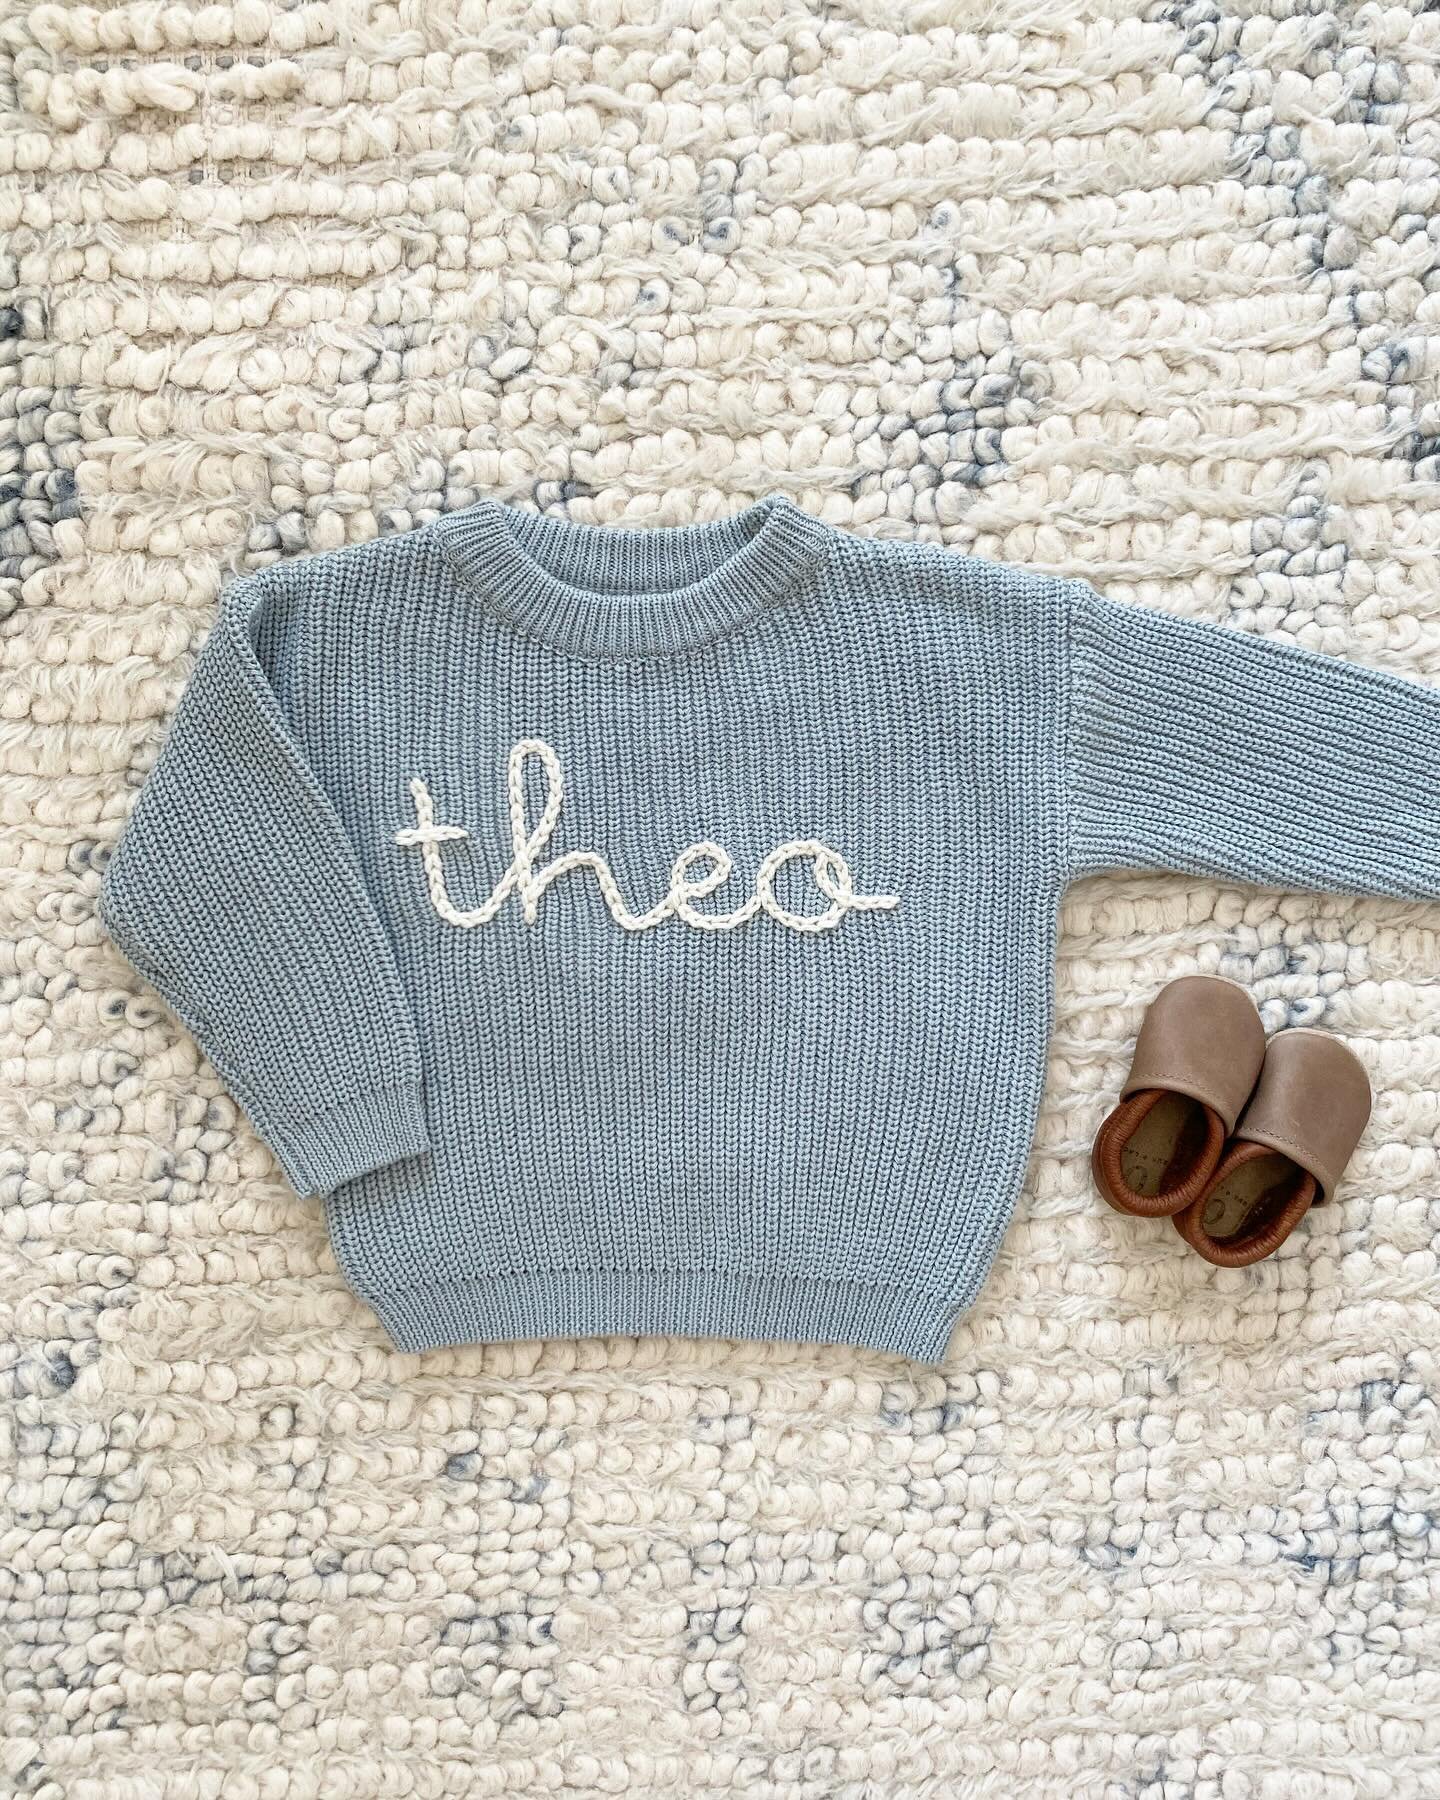 These baby boy sweaters are sending me 🥹🥰

Welcome to the world sweet Theo! 🩵